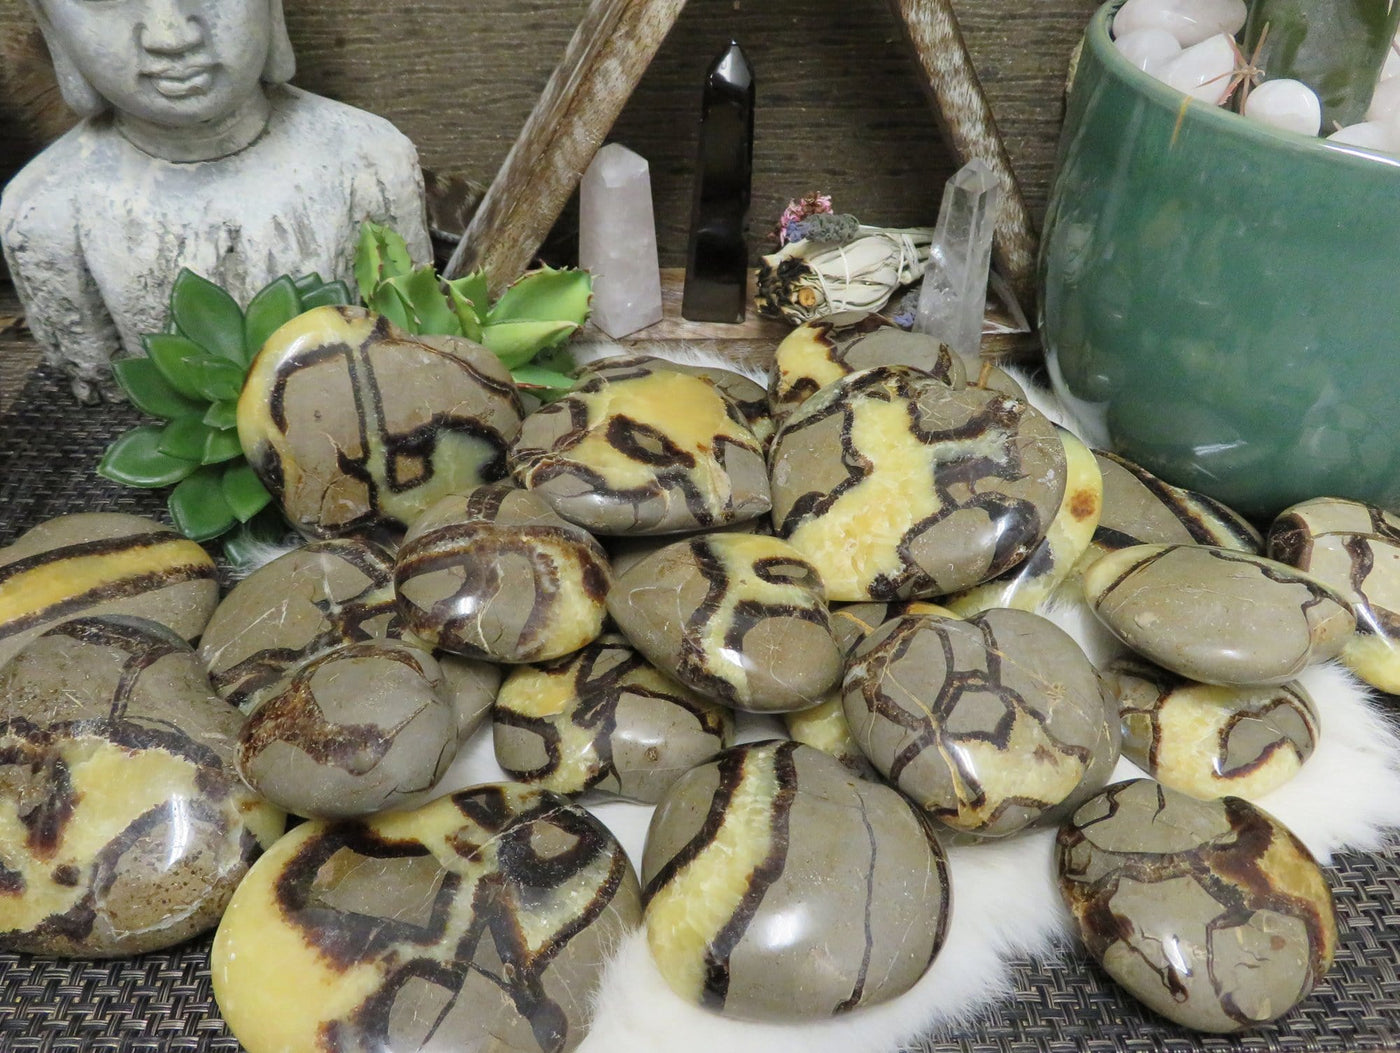 many septarian polished heart stones in a pile on display for possible variations